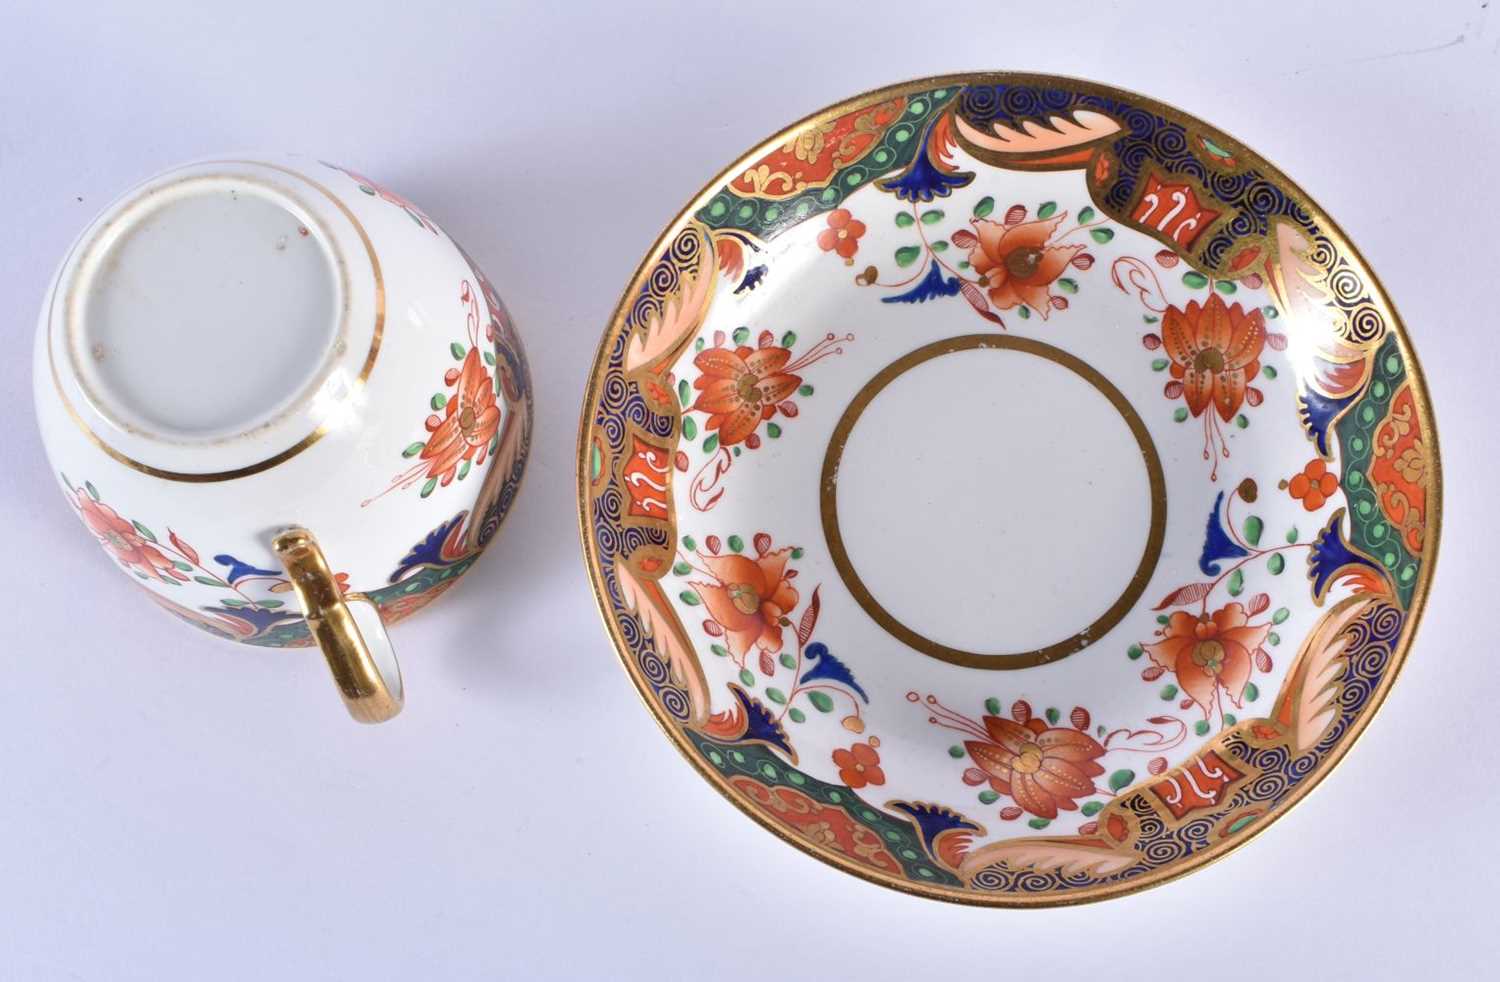 Spode imari teacup and saucer painted in imari style, and four Spode coffee cans and a printed - Image 3 of 11